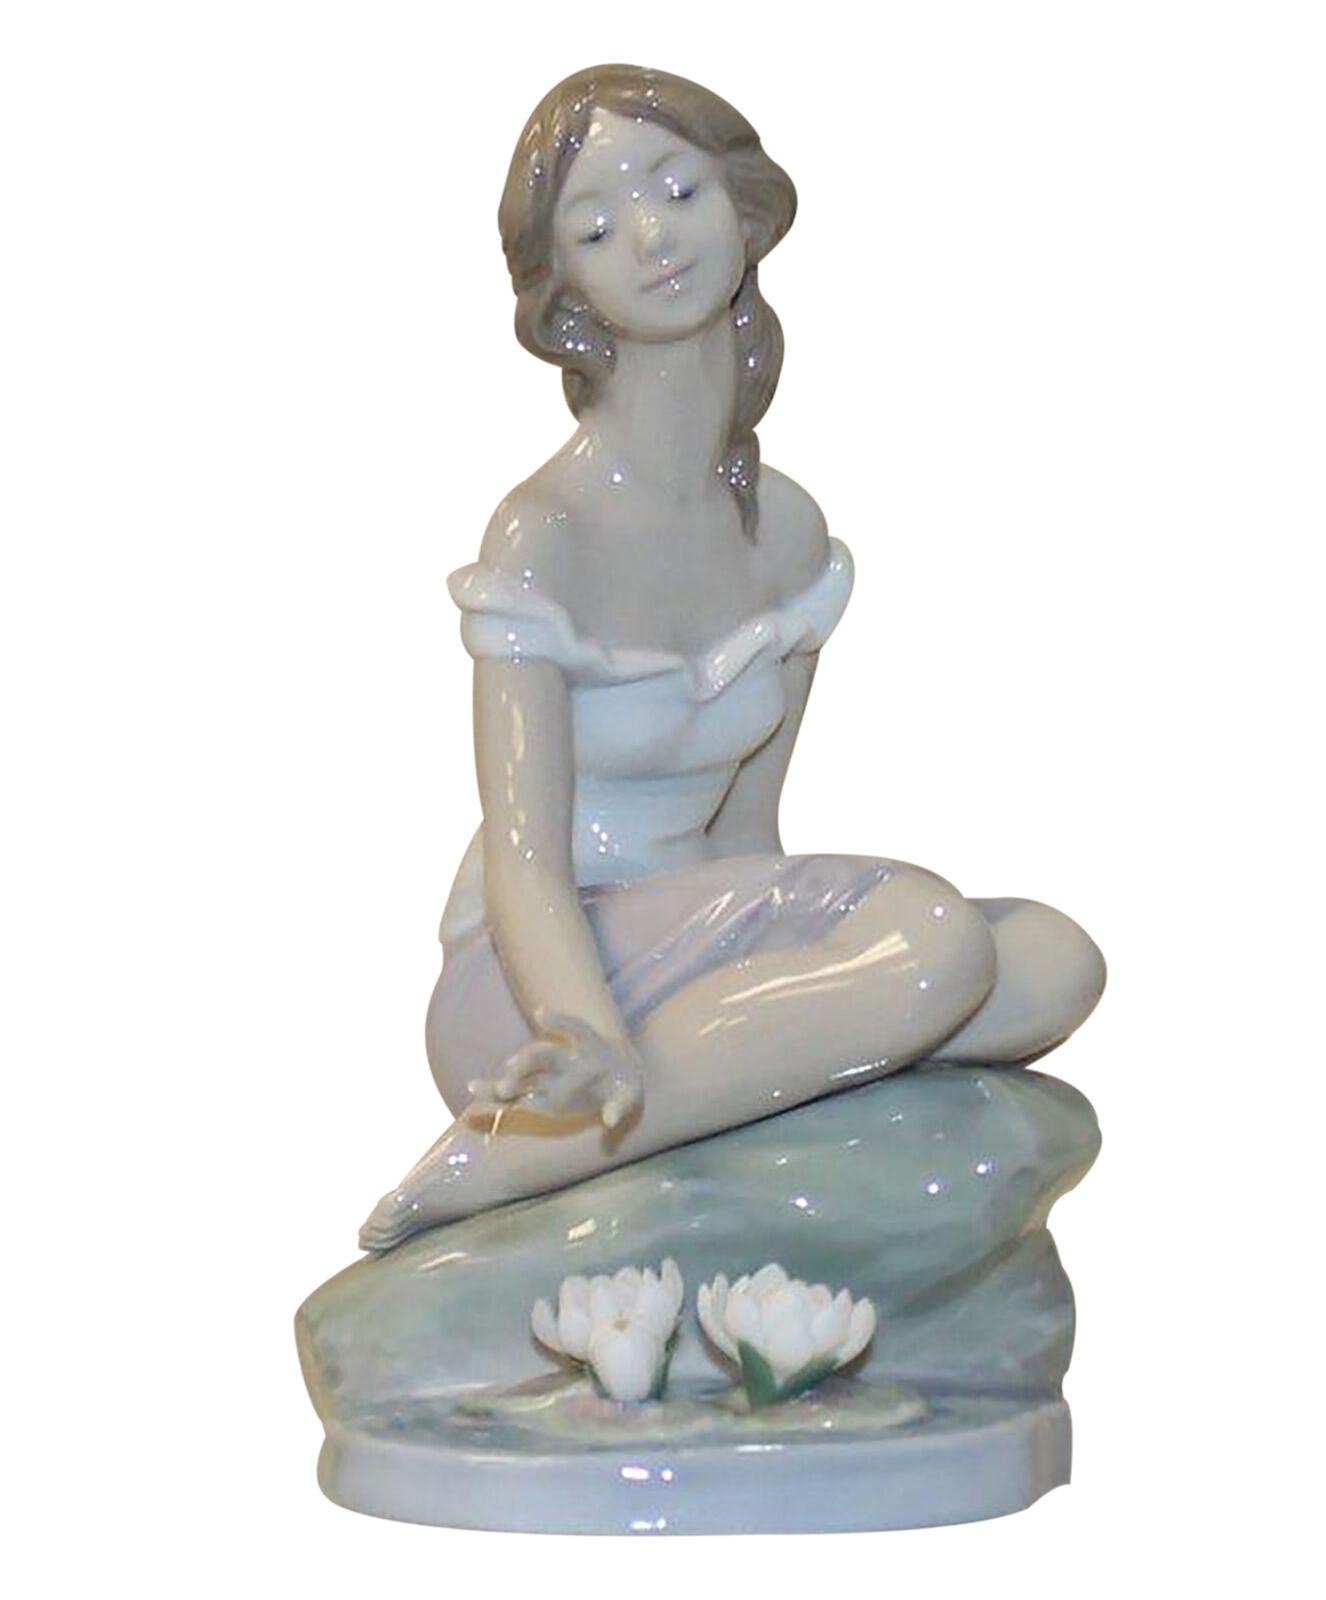 Lladro Figurine, Reflections of Helena, Privilege Collection (7706) 6.7